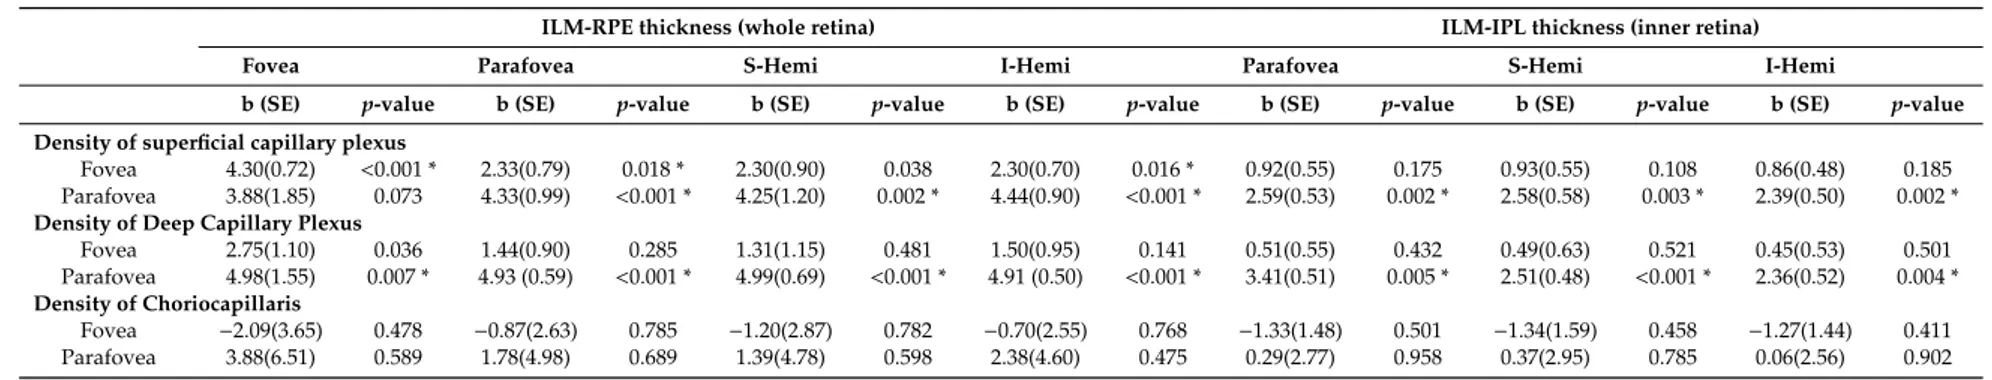 Table 6. Mixed-effects models using the eye as the unit of analysis performed to assess the effect of vascular density on retinal thickness.